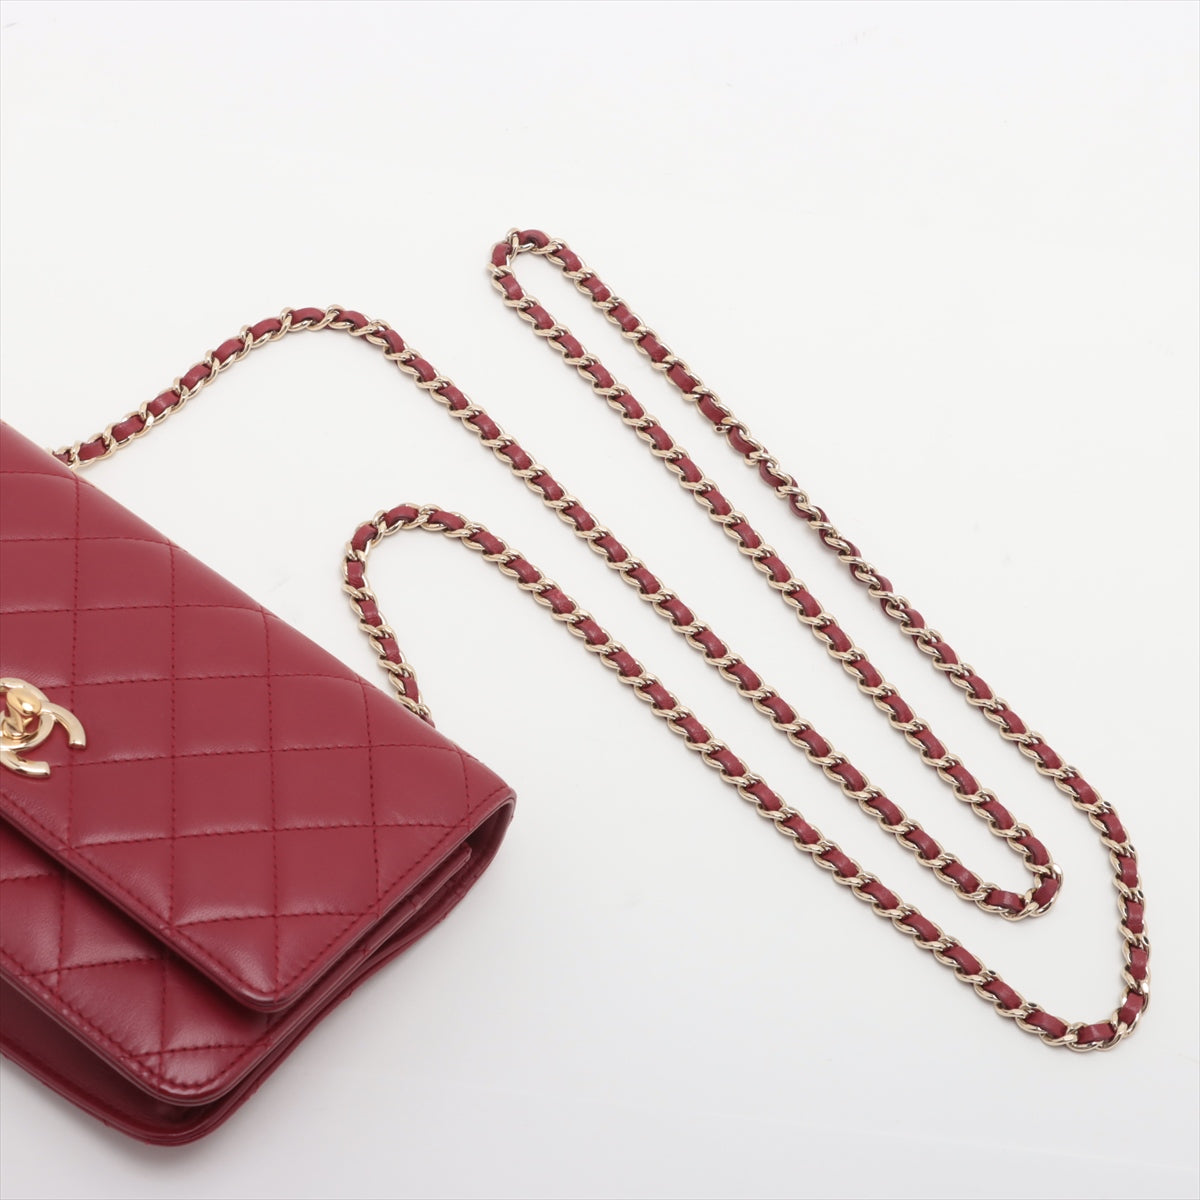 Chanel Matelasse Lambskin Chain Wallet Red Gold Metal Fittings 24XXXXXX